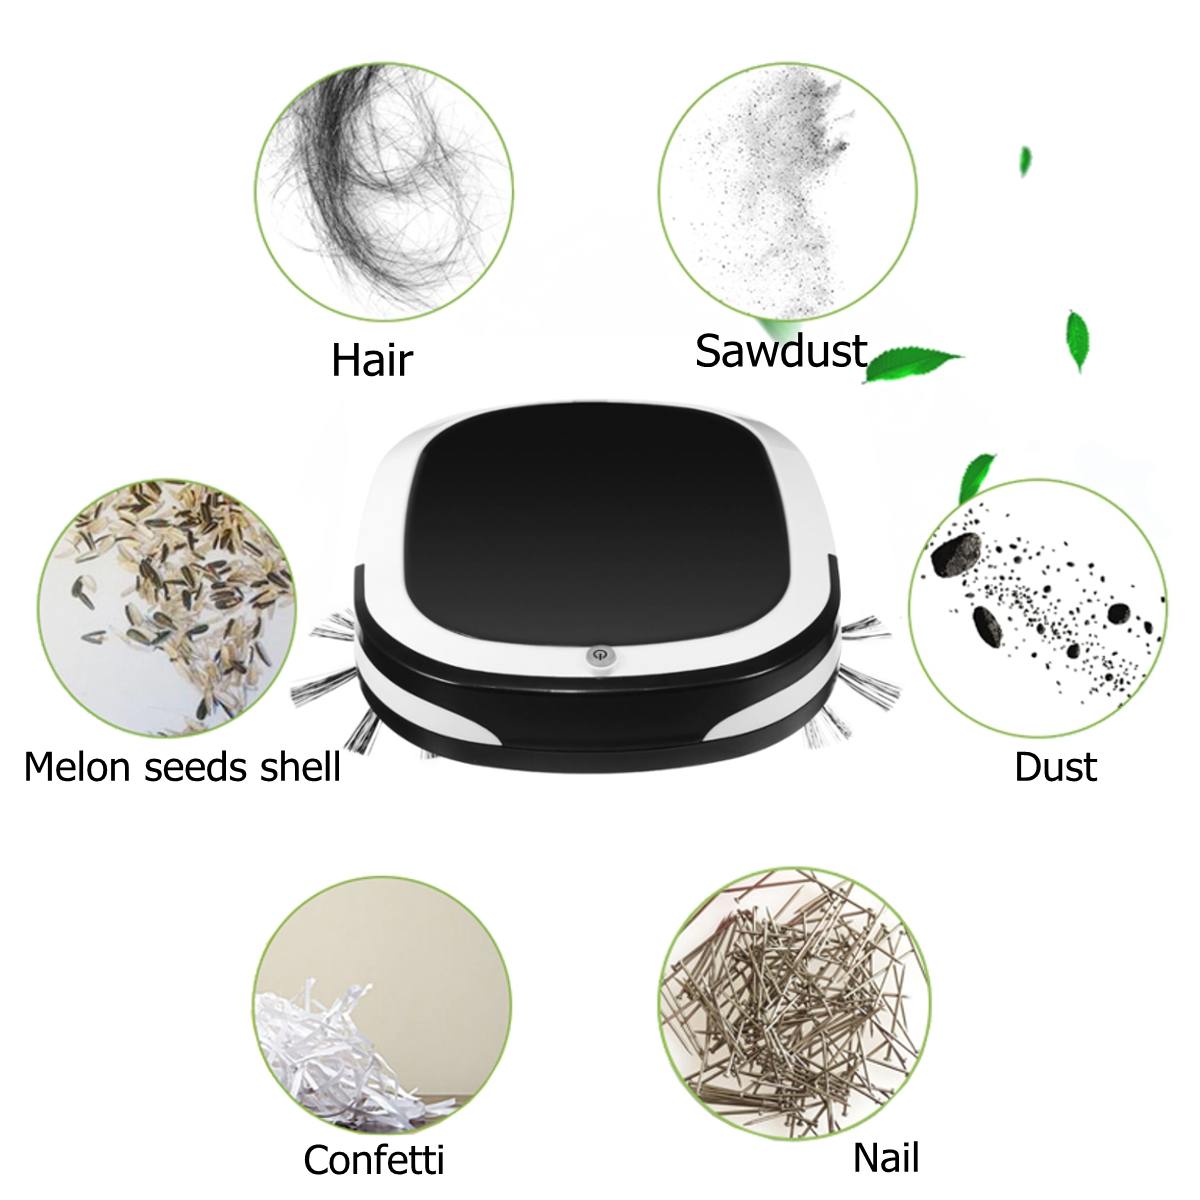 Wireless Vacuum Cleaner Vacuum Smart Cordless For Home Appliances Household Cleaning Electric Vacuum Cleaner Robot Sweeper